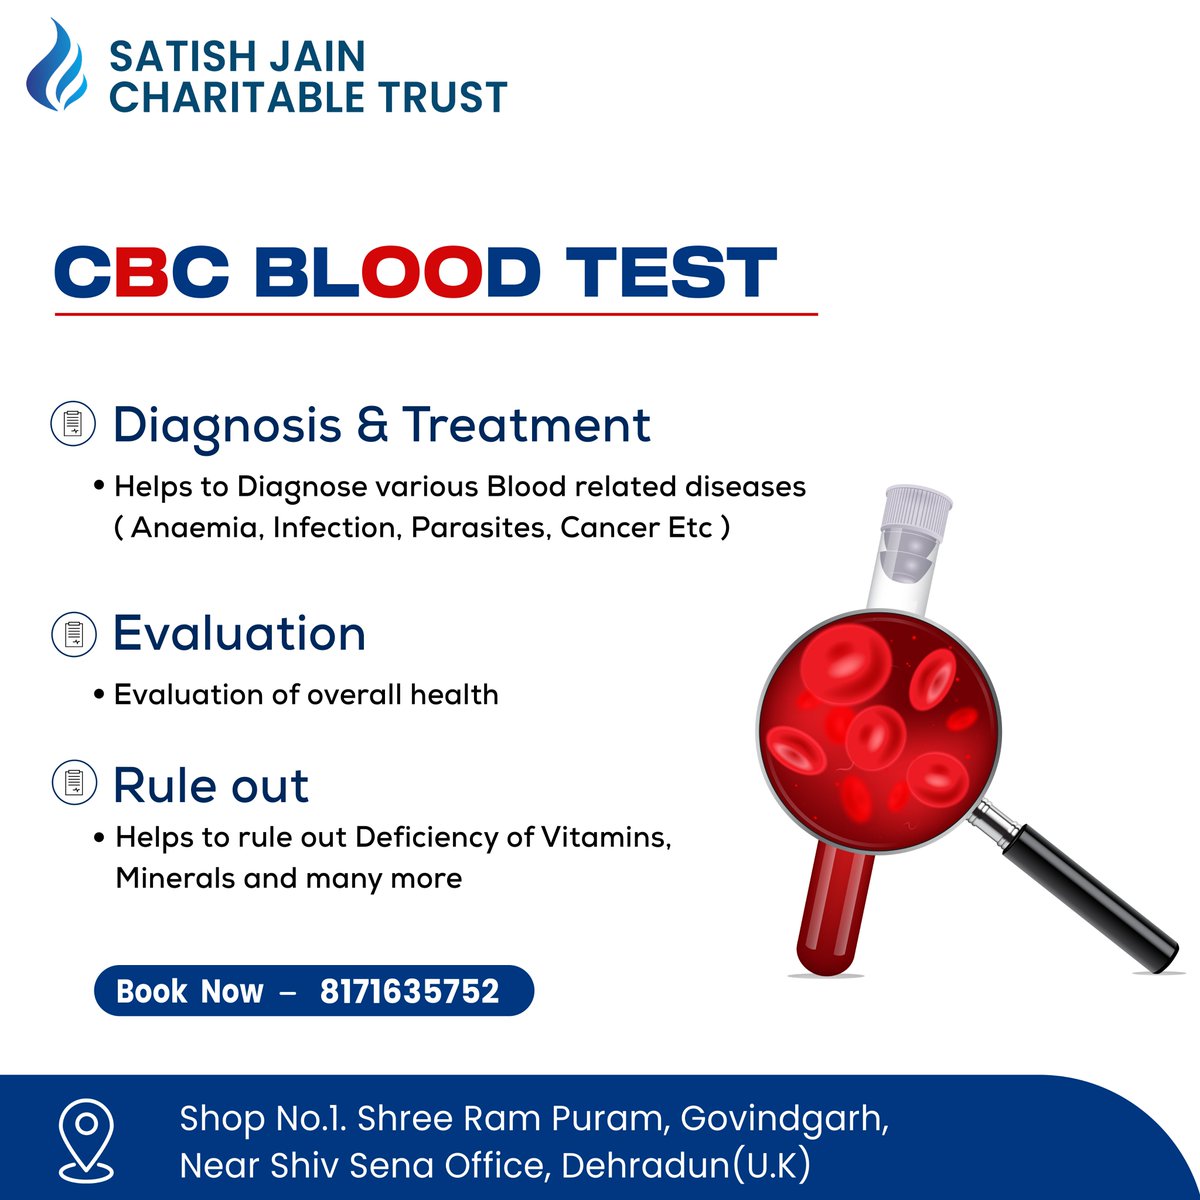 Attention Dehradun! Get your all blood test done at Satish Jain Charitable Trust including the CBC blood test an affordable price now. 

#bloodtest #test #labs #CharitableTrust #trust #CBCtest #dehraduncity #dehradun #blood #pathologylab #pathology #healthyliving #Health